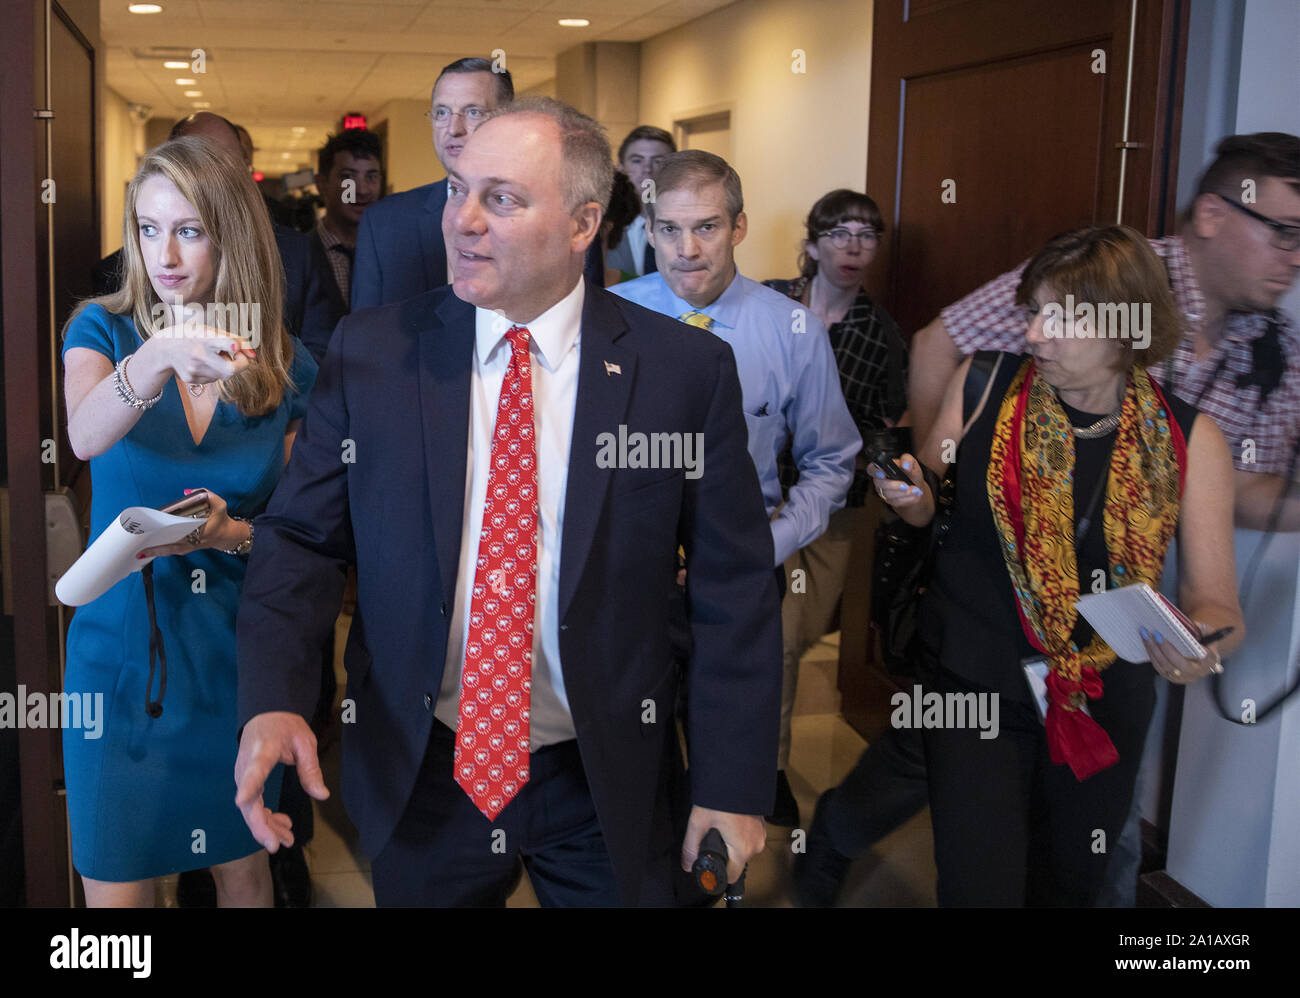 Washington, United States. 25th Sep, 2019. House Minority Whip Rep. Steve Scalise (R-LA) speaks to the media after the announcement by Speaker of the House Rep. Nancy Pelosi (D-CA) that the House is launching a formal impeachment inquiry into President Trump, on Capitol Hill in Washington, DC on Wednesday, September 25, 2019. Photo by Tasos Katopodis/UPI Credit: UPI/Alamy Live News Stock Photo